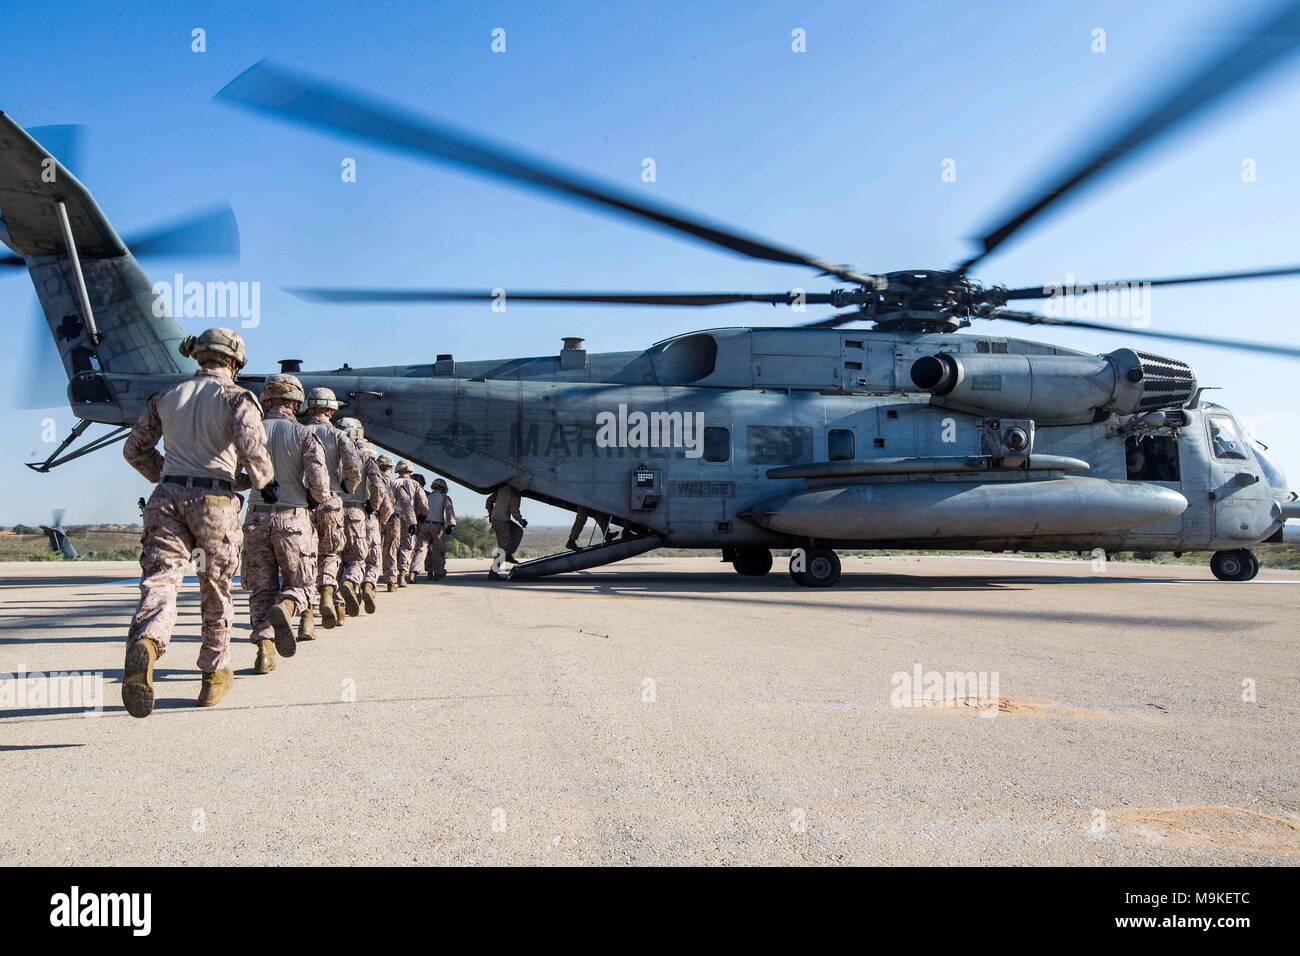 ISRAEL (March 12, 2018) U.S. Marines assigned to the Tactical Recovery of Aircraft Personnel (TRAP) team, 26th Marine Expeditionary Unit (MEU), board a CH-53E Super Stallion helicopter to begin fast-rope training, Israel, March 12, 2018. The 26th MEU is participating in exercise Juniper Cobra 2018 to strengthen relationships and capabilities with the Israeli Defense Force. (U.S. Marine Corps photo by Lance Cpl. Tojyea G. Matally/Released) Stock Photo